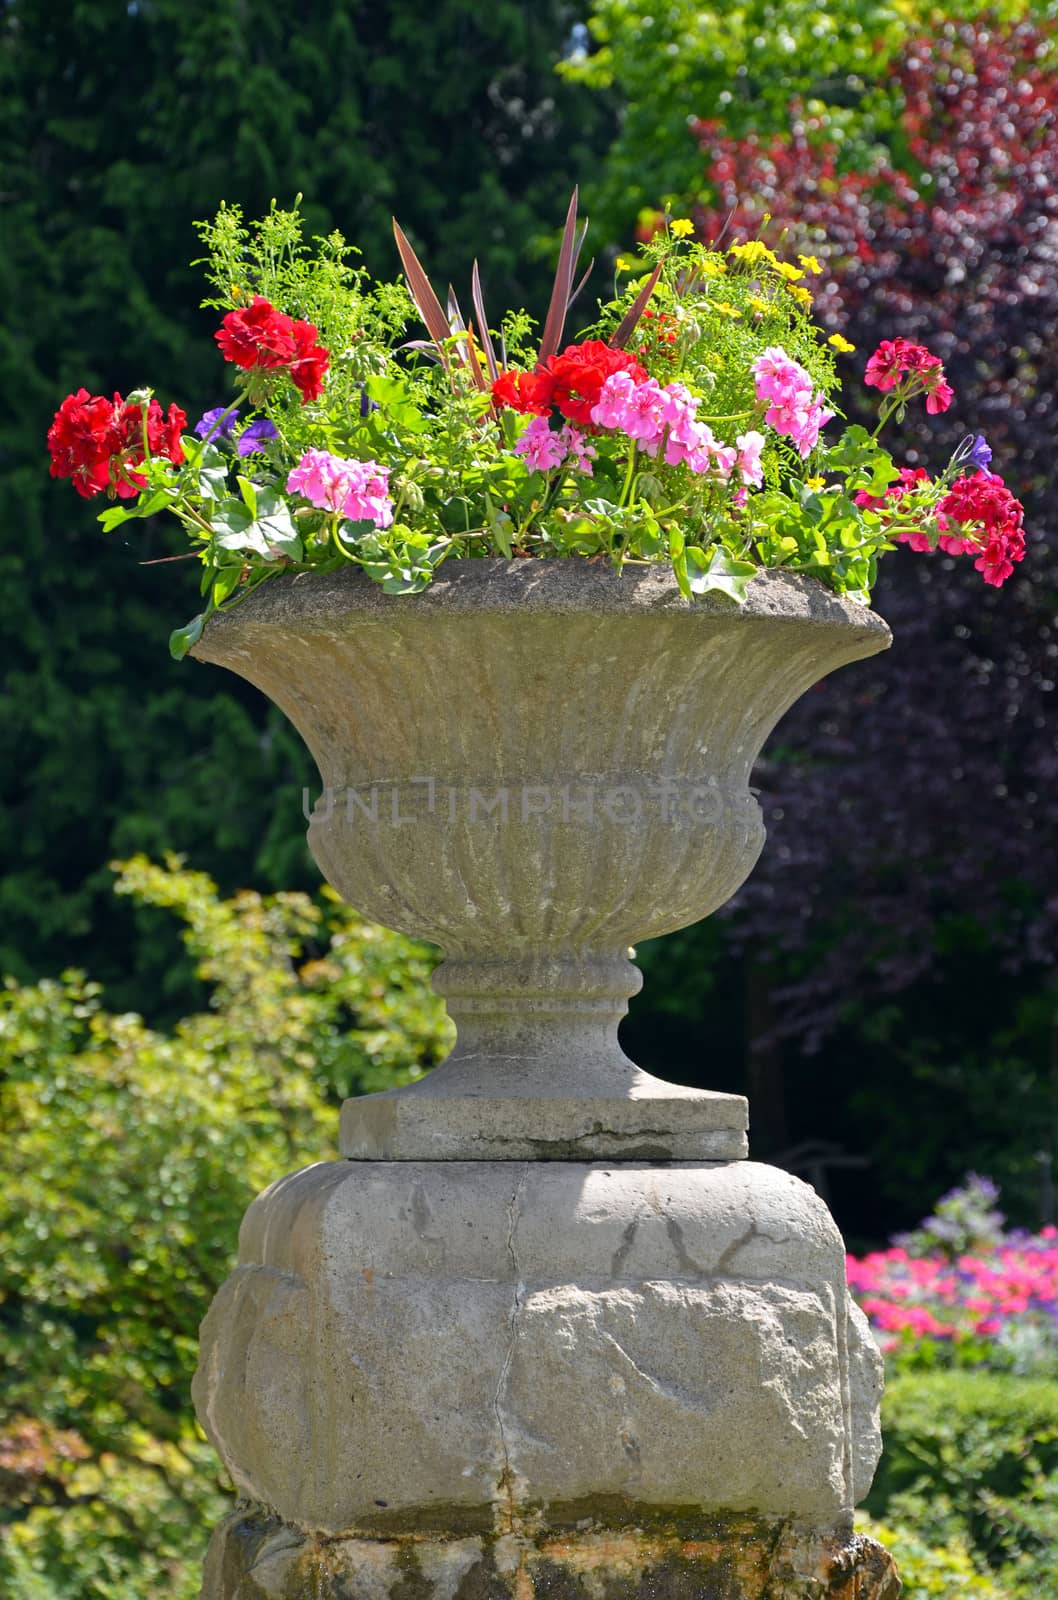 Old stone planter with colorful geranium flowers